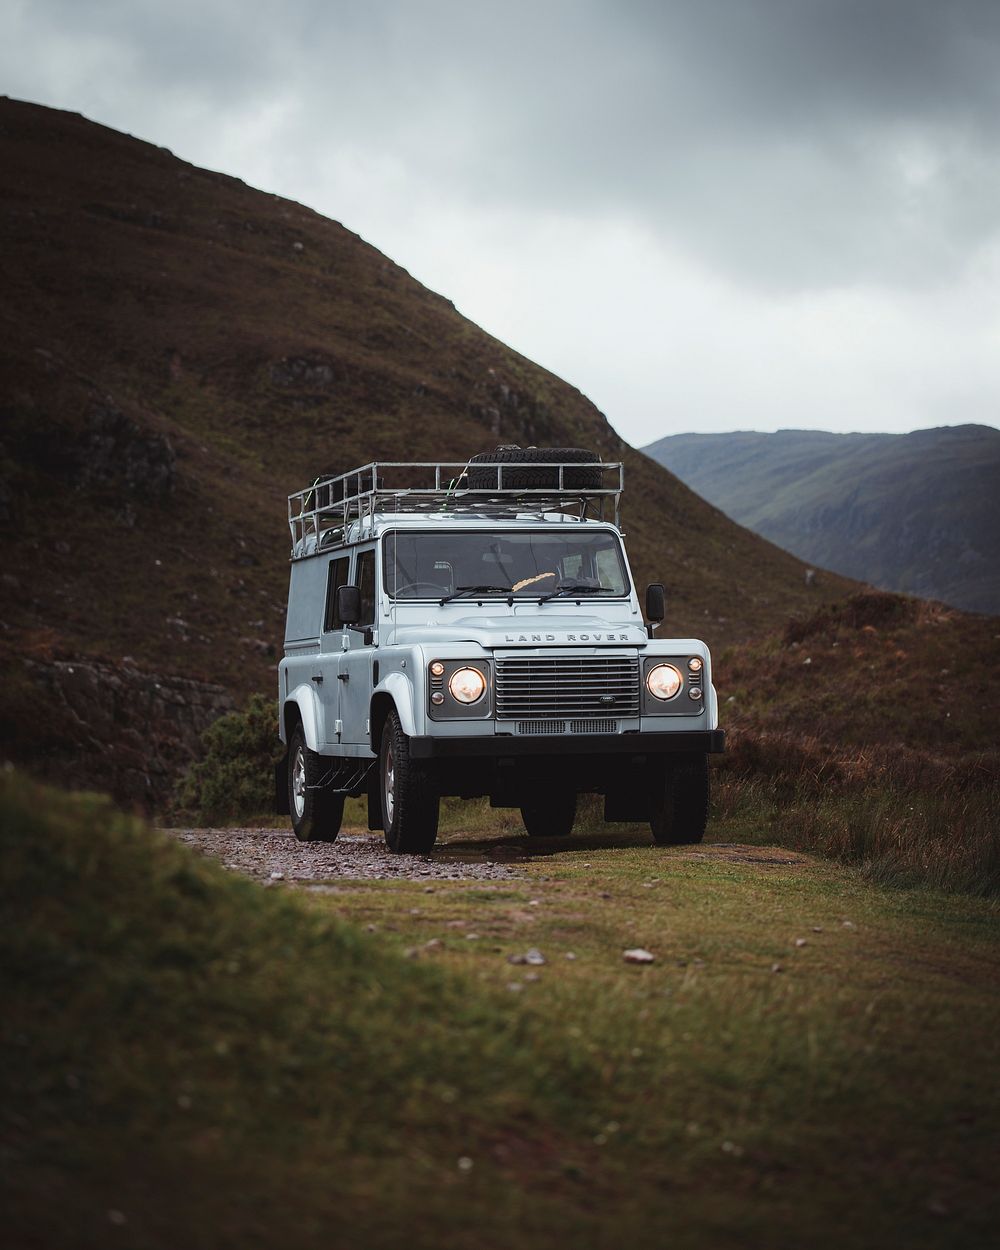 2019, Scotland, Landrover Defender driving in the countryside